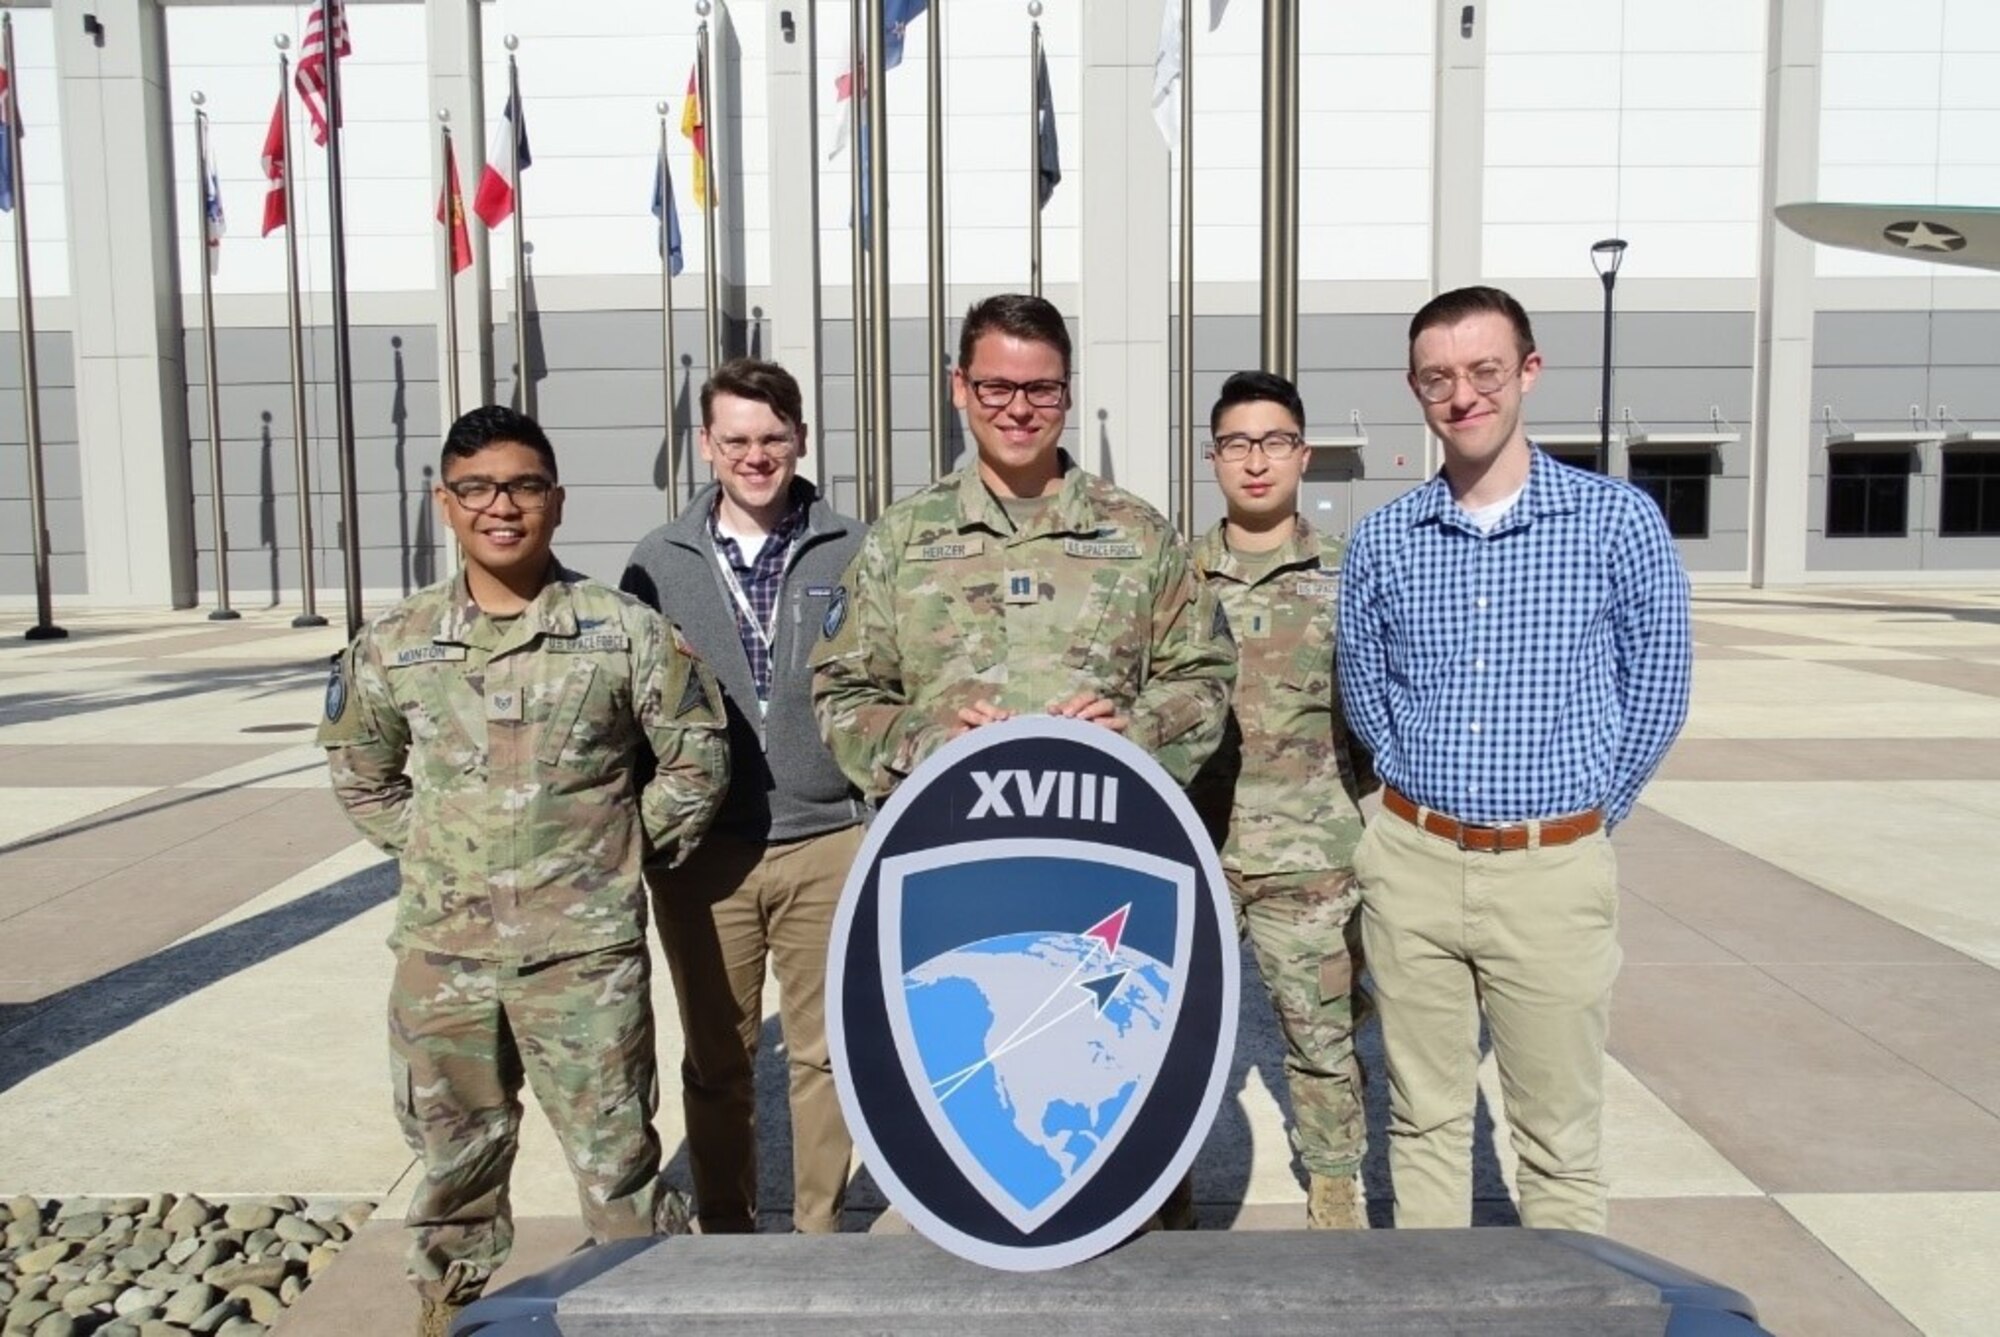 18th Space Control Squadron recognized for innovation